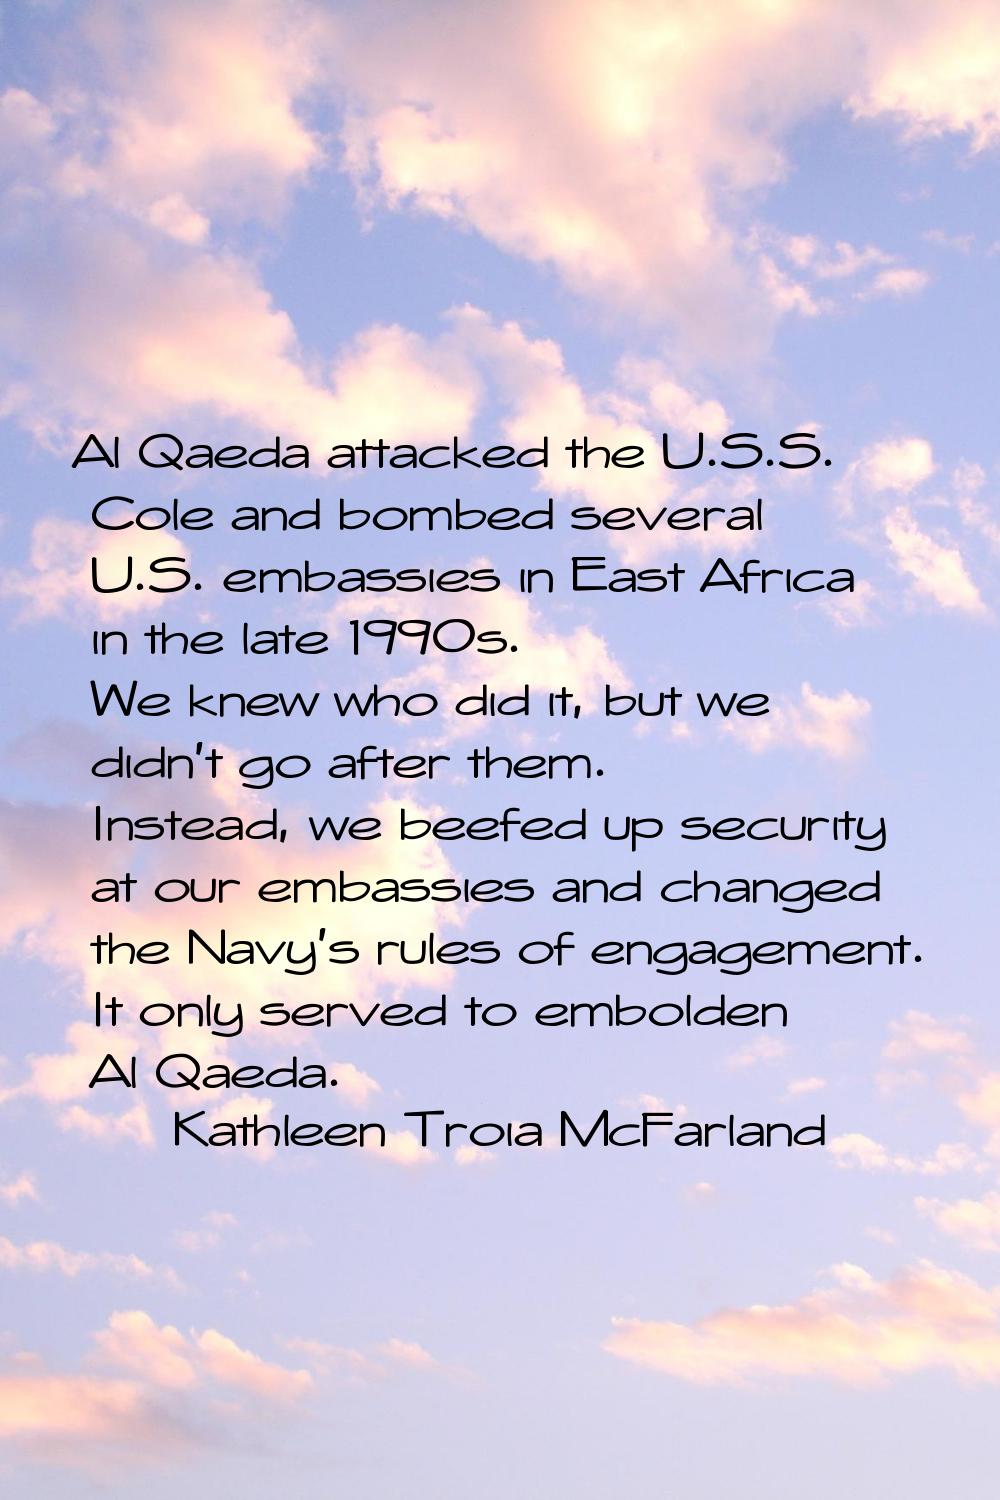 Al Qaeda attacked the U.S.S. Cole and bombed several U.S. embassies in East Africa in the late 1990